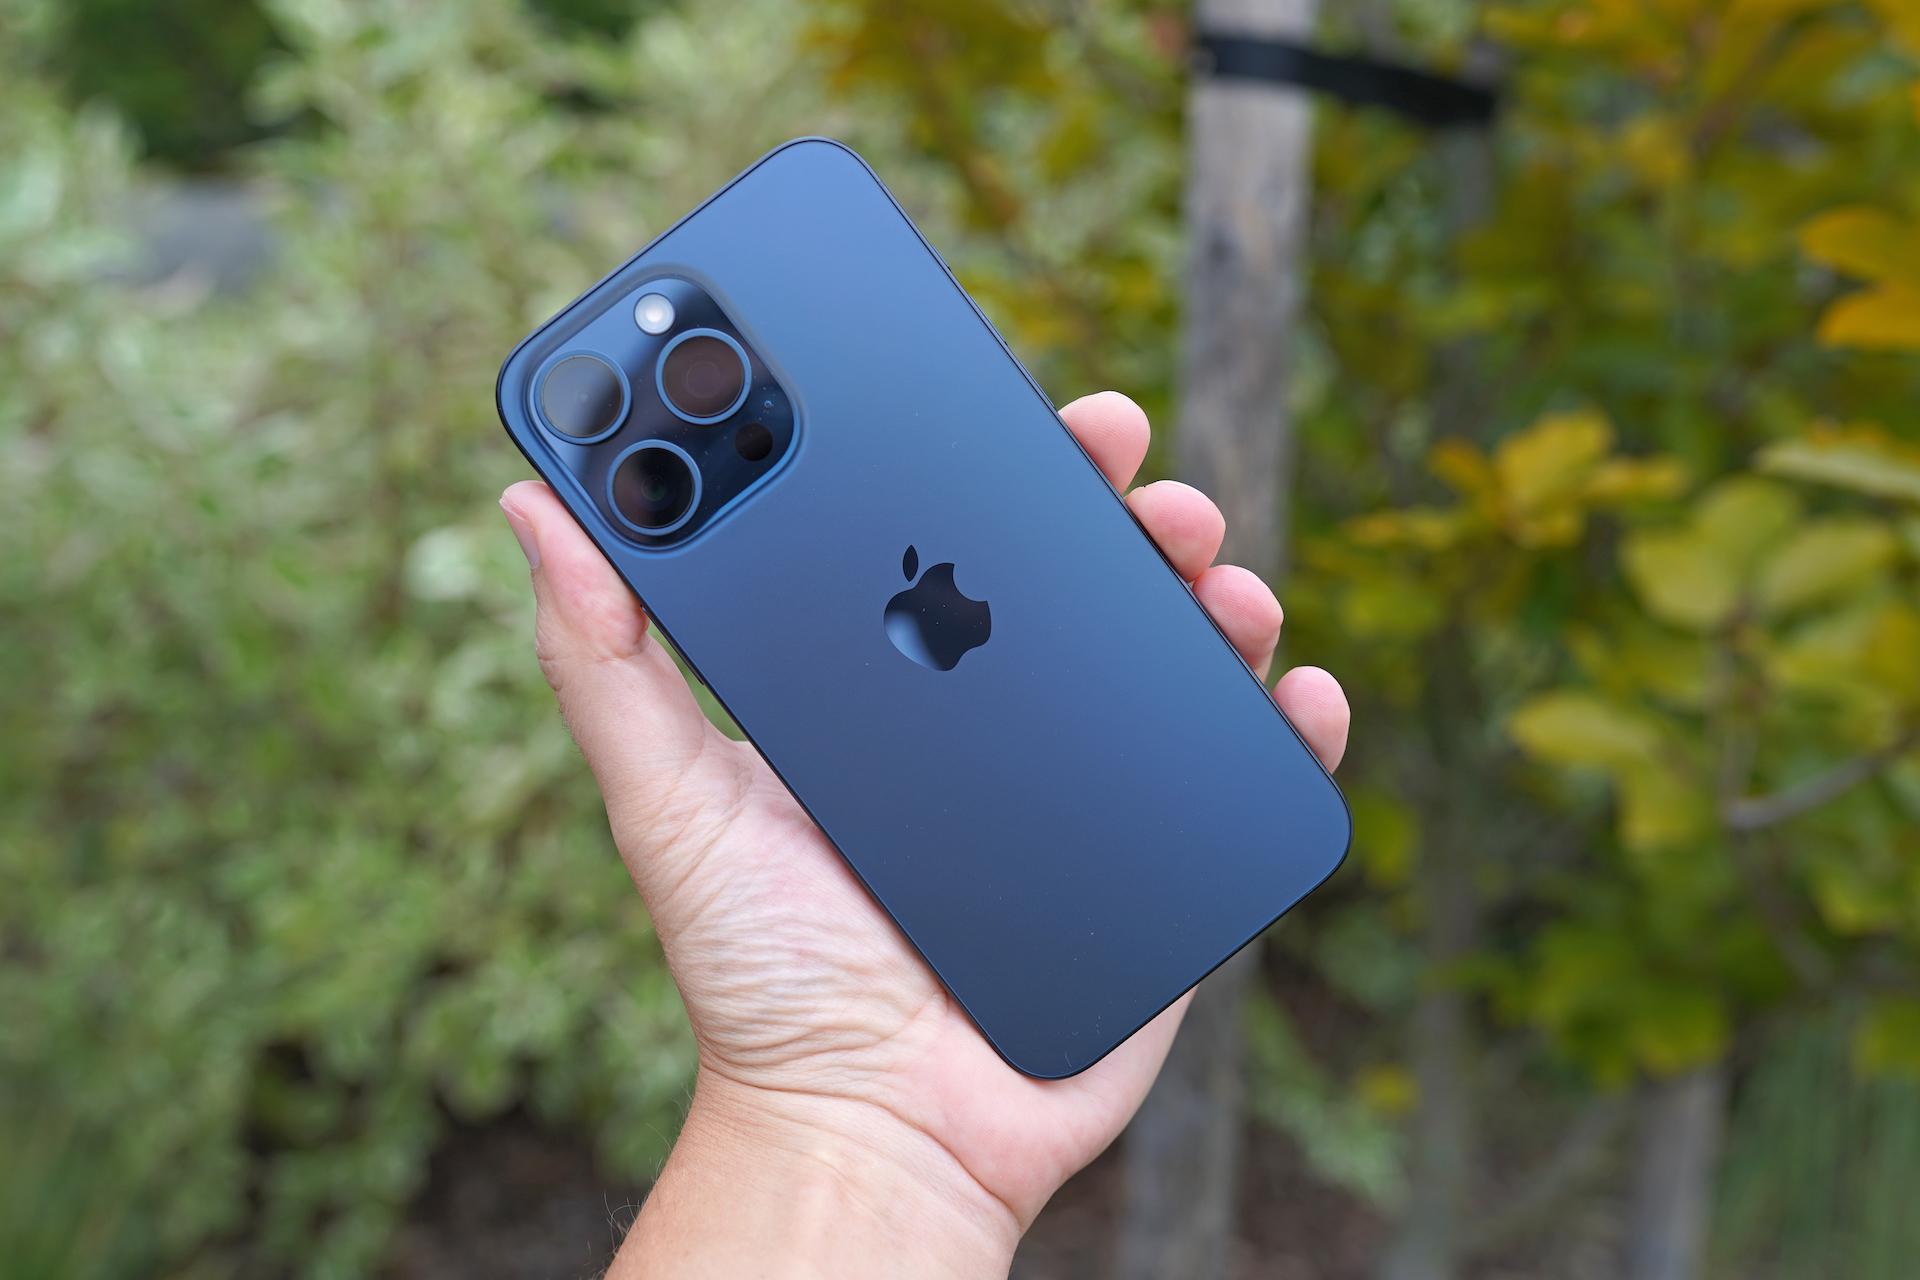 iPhone Pro: Durability Test Results and Specs Revealed